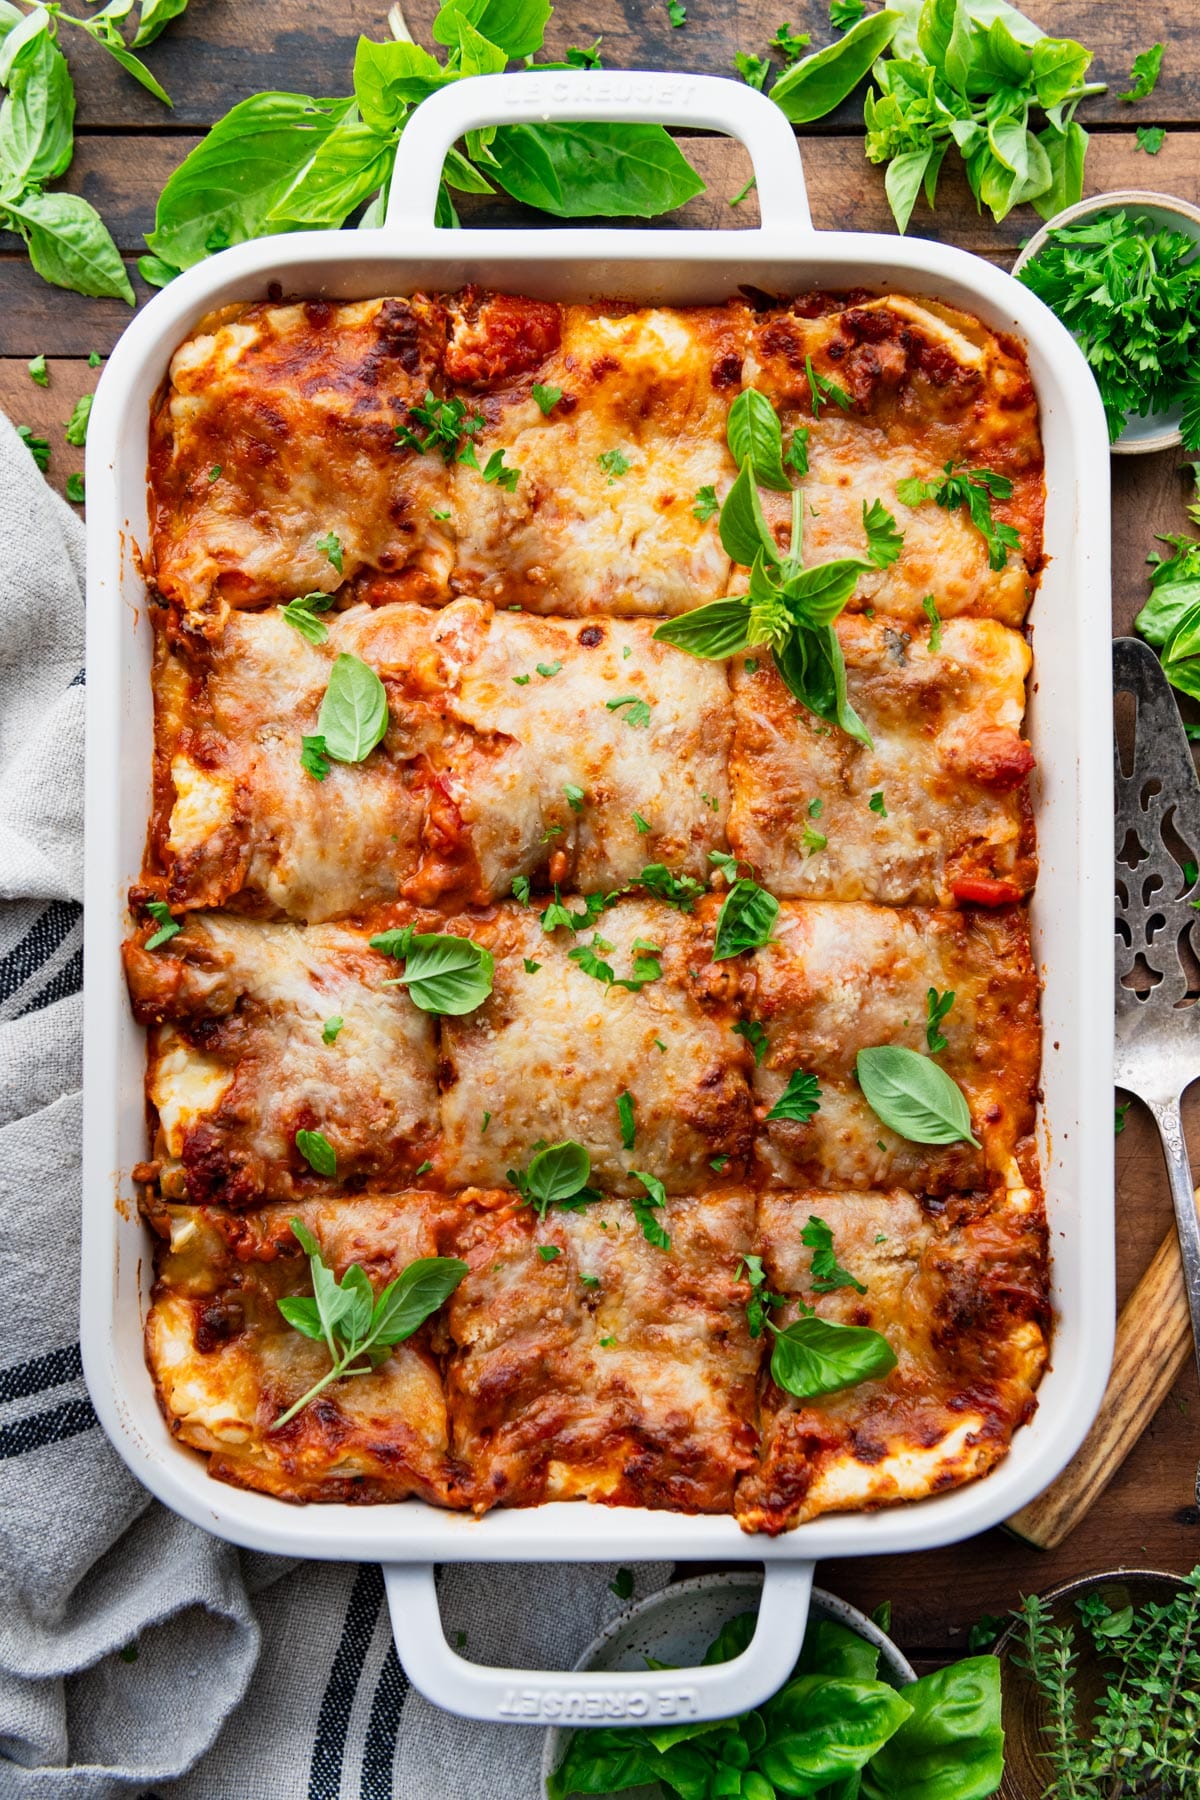 Classic lasagna recipe baked in a white dish and sliced into squares.